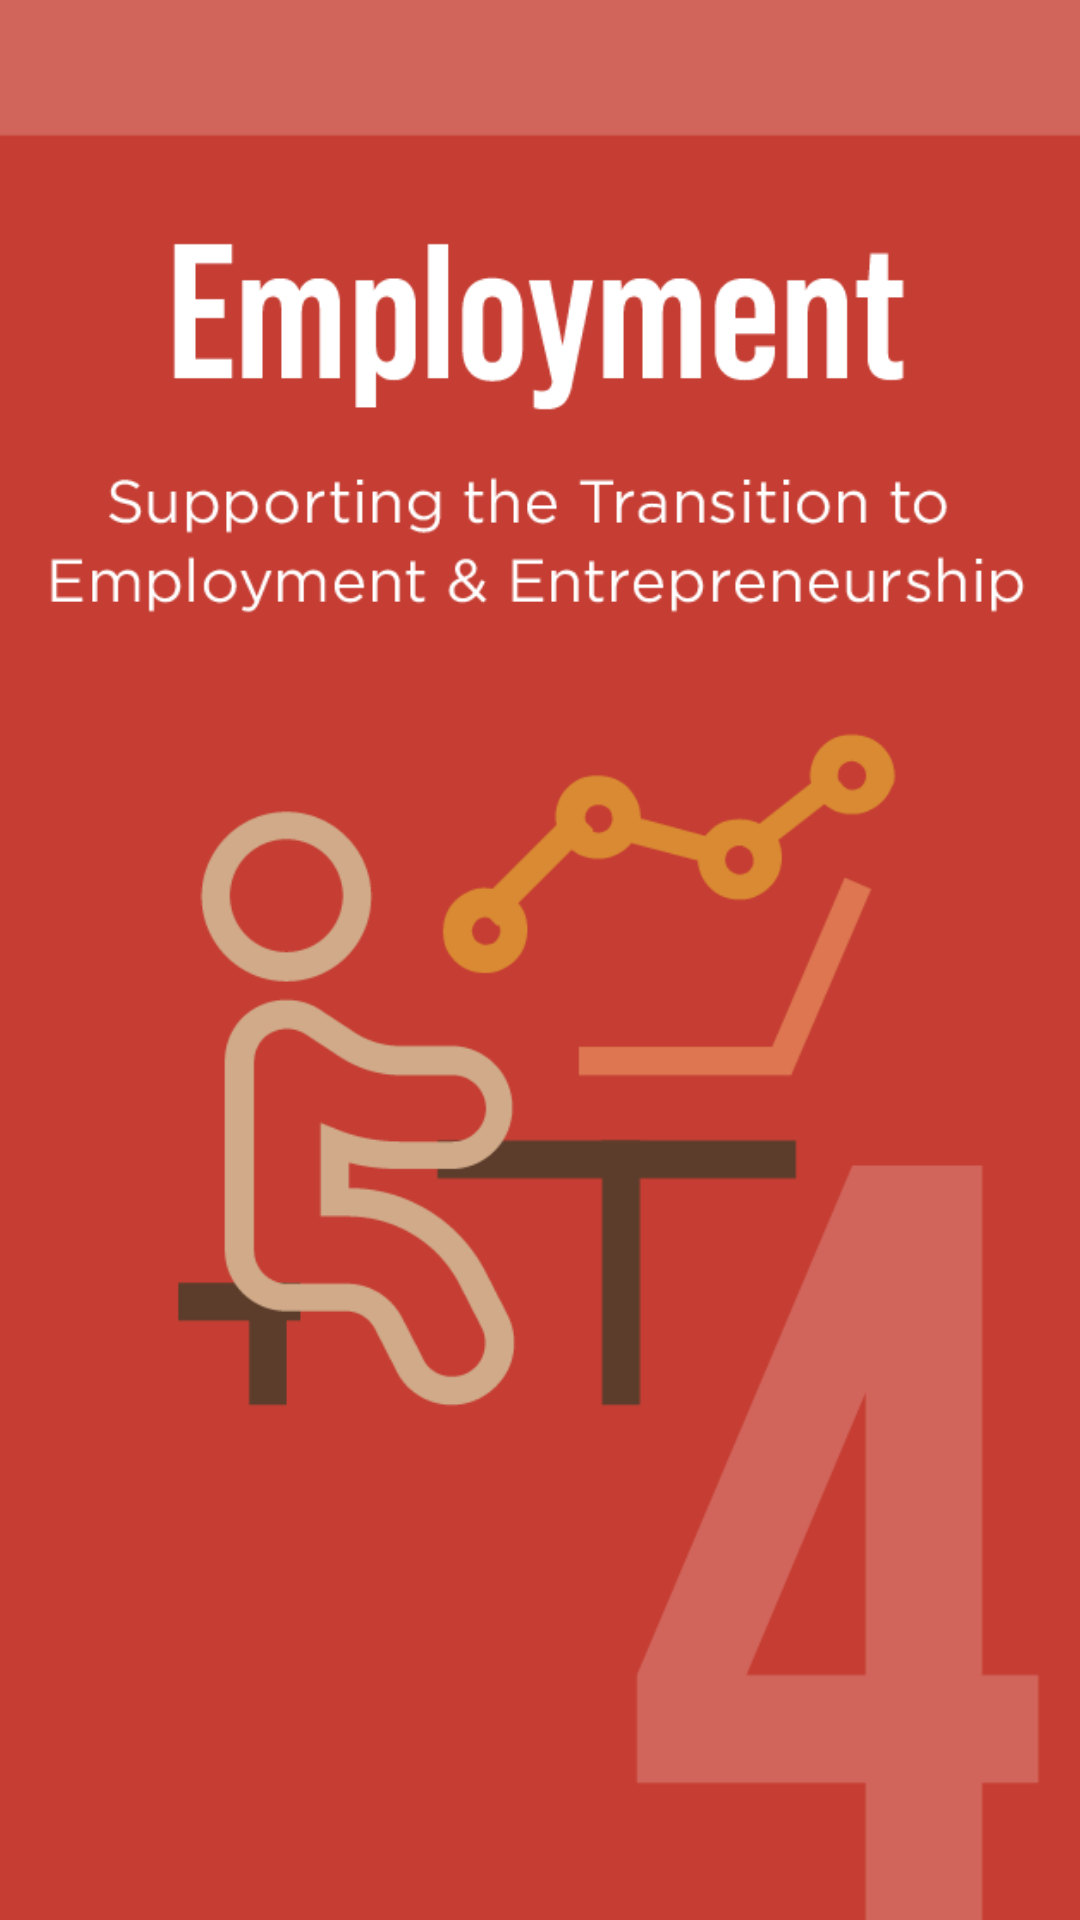 Employment - Supporting the transition to employment and entrepreneurship